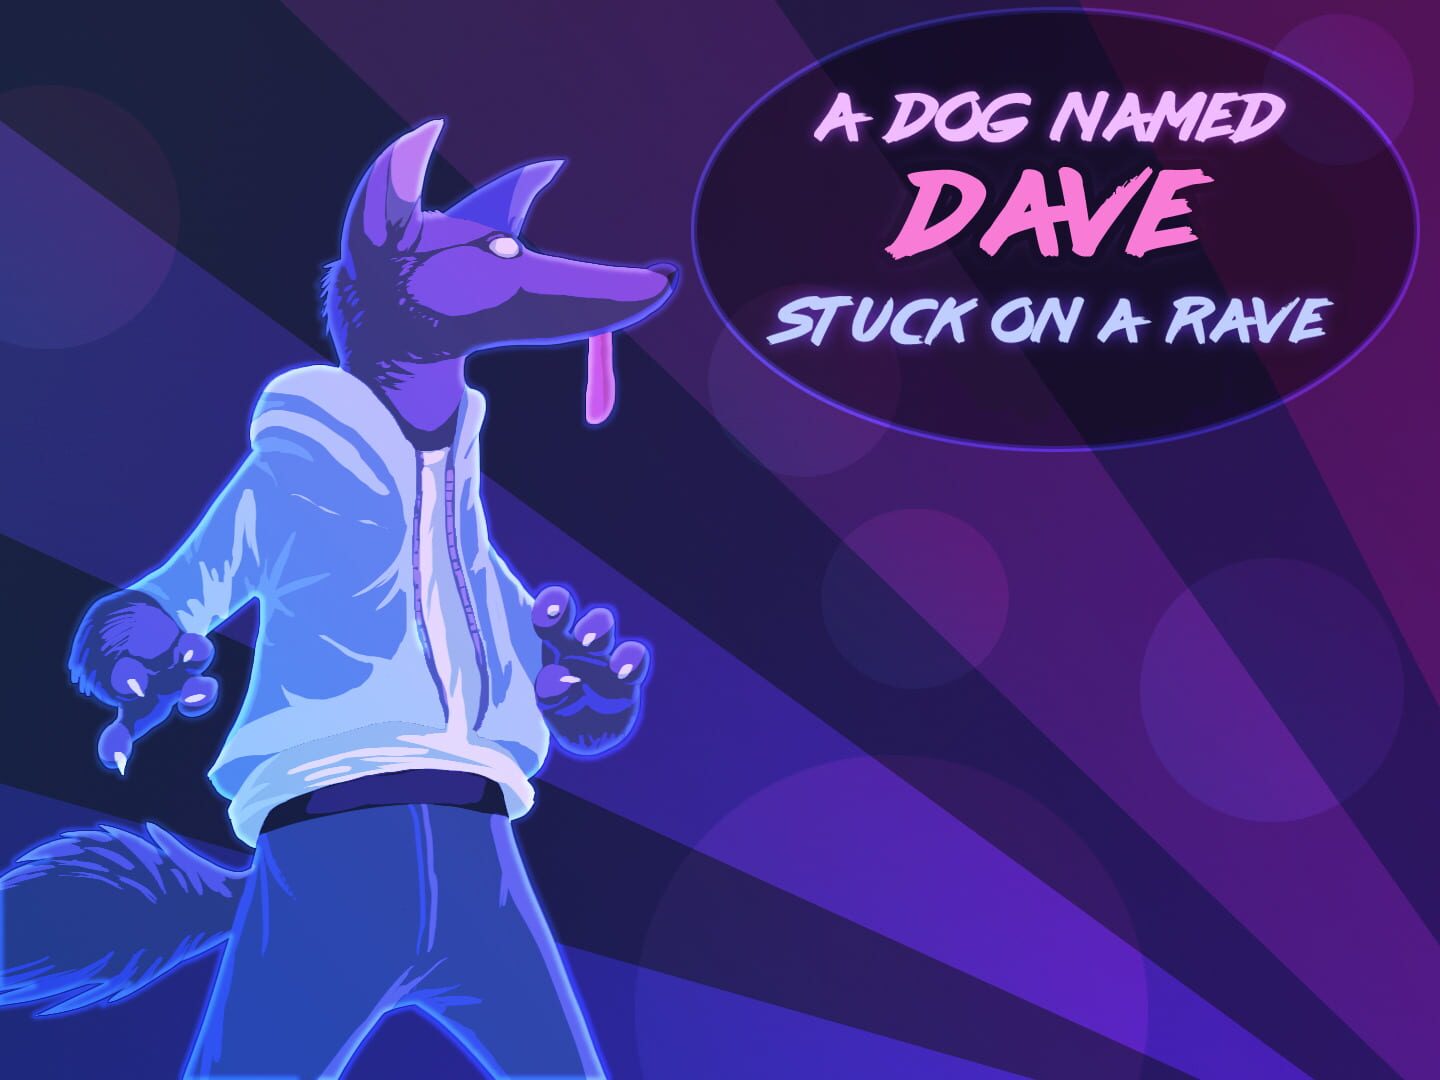 A Dog Named Dave Stuck on a Rave featured image